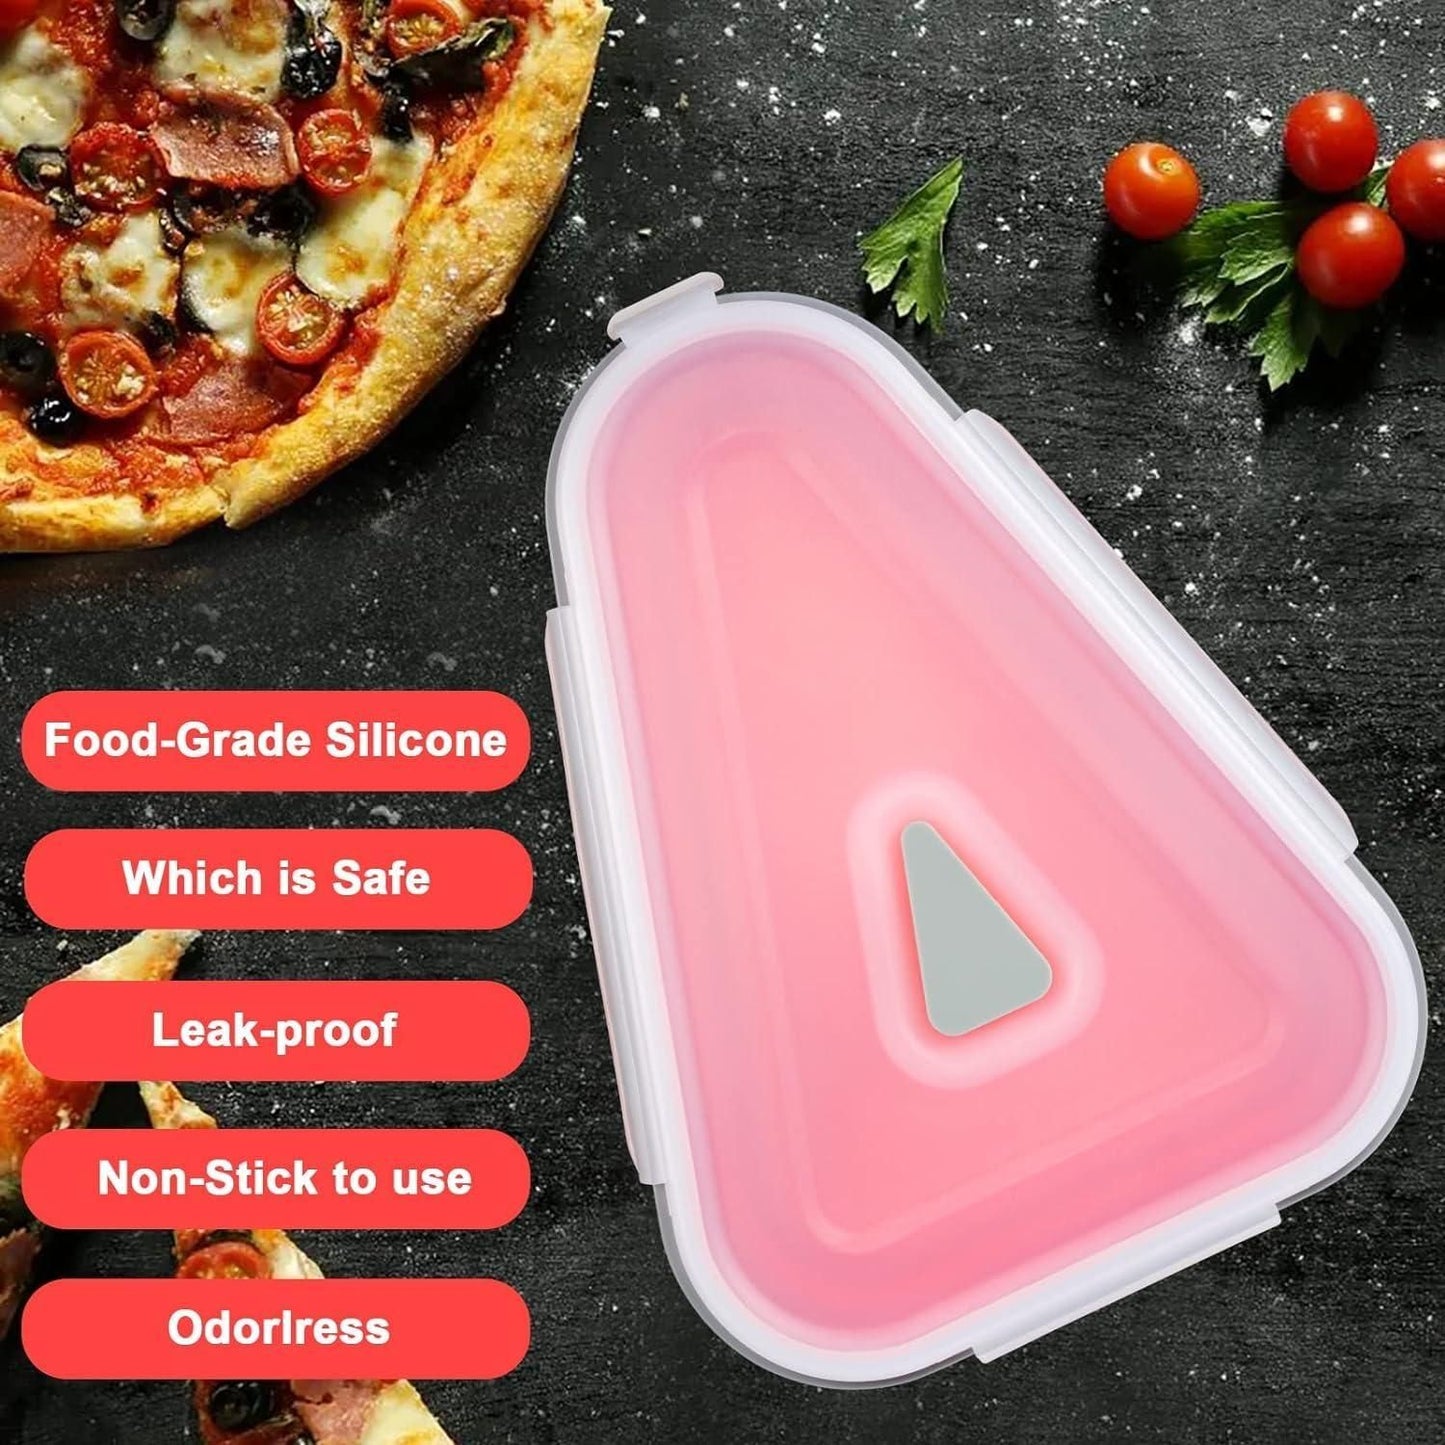 Pizza Slice Storage Container with 5 Serving Trays